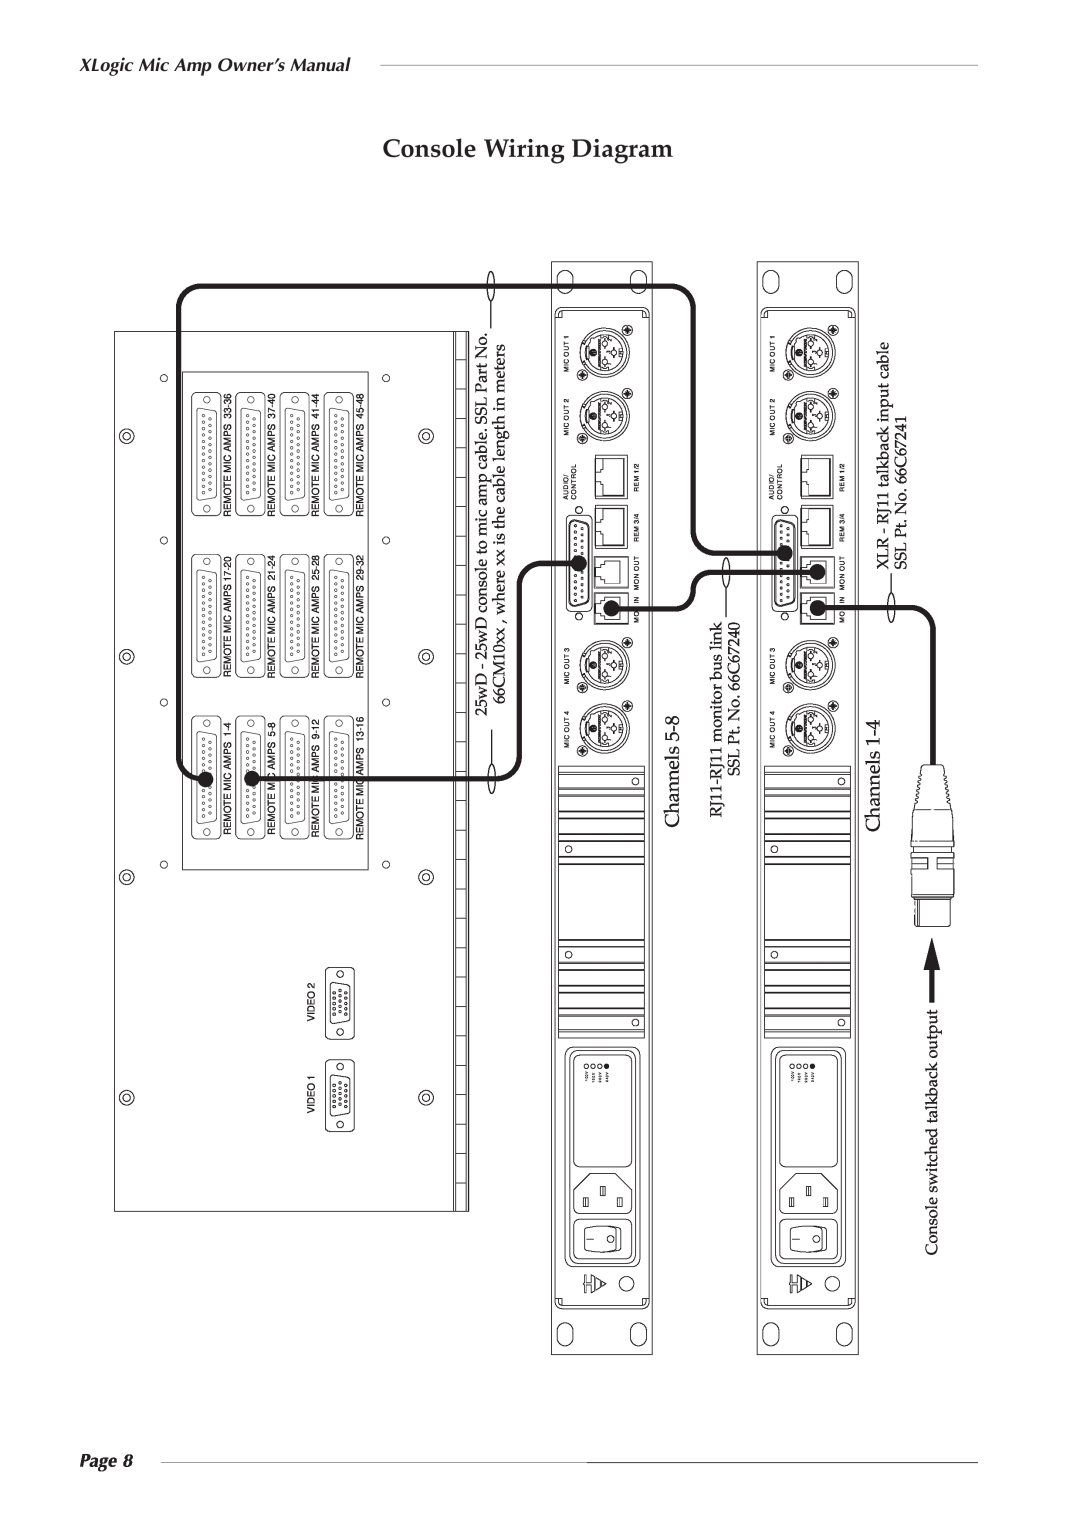 Solid State Logic 82S6XL020E owner manual Console Wiring Diagram, Channels, Page 